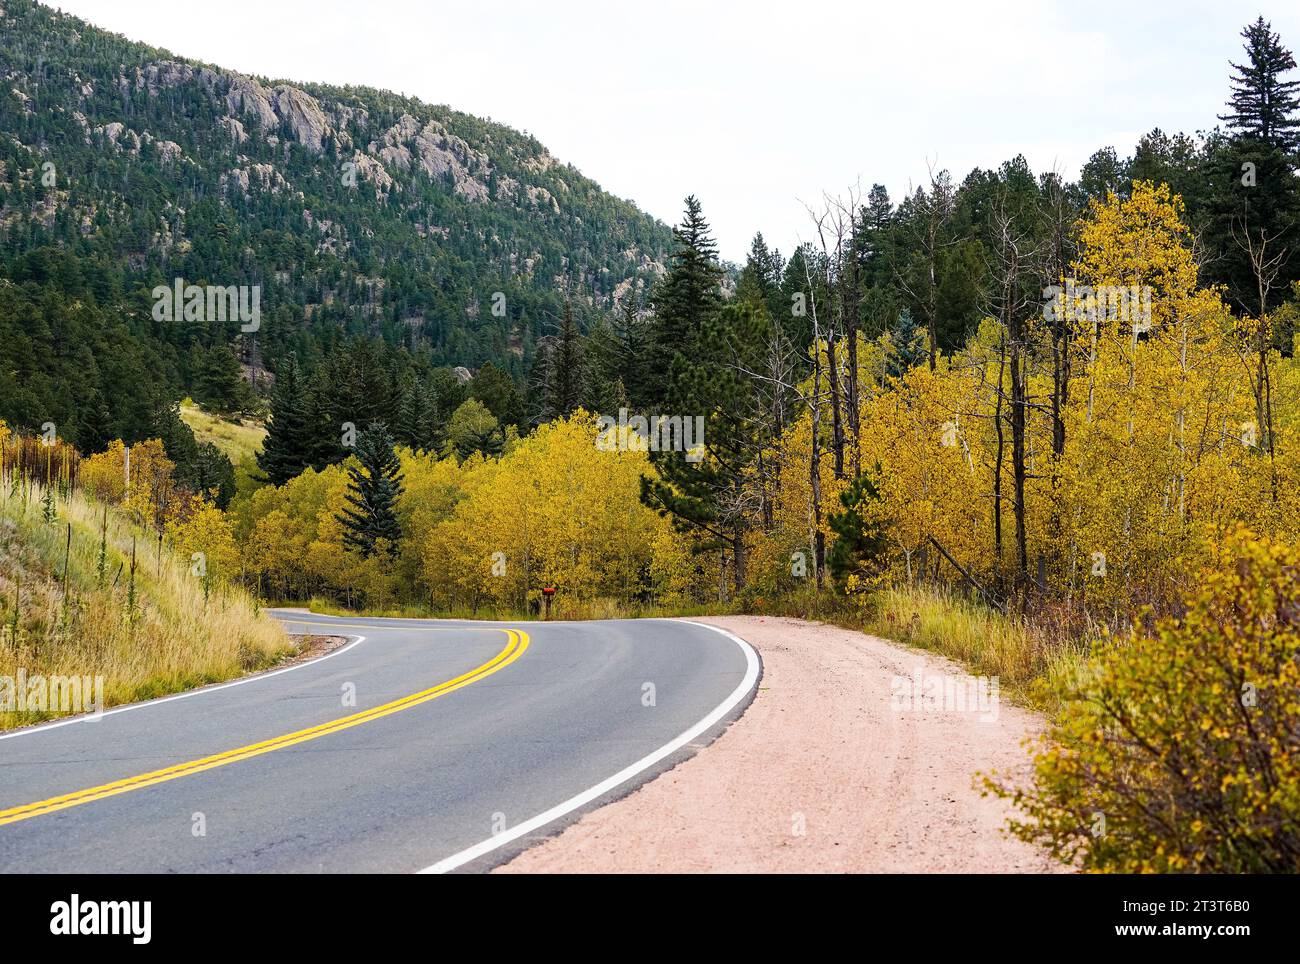 A winding road runs through Golden Gate Canyon State Park in Colorado with changing Aspen trees lining the road, and pines trees high up the mountains Stock Photo